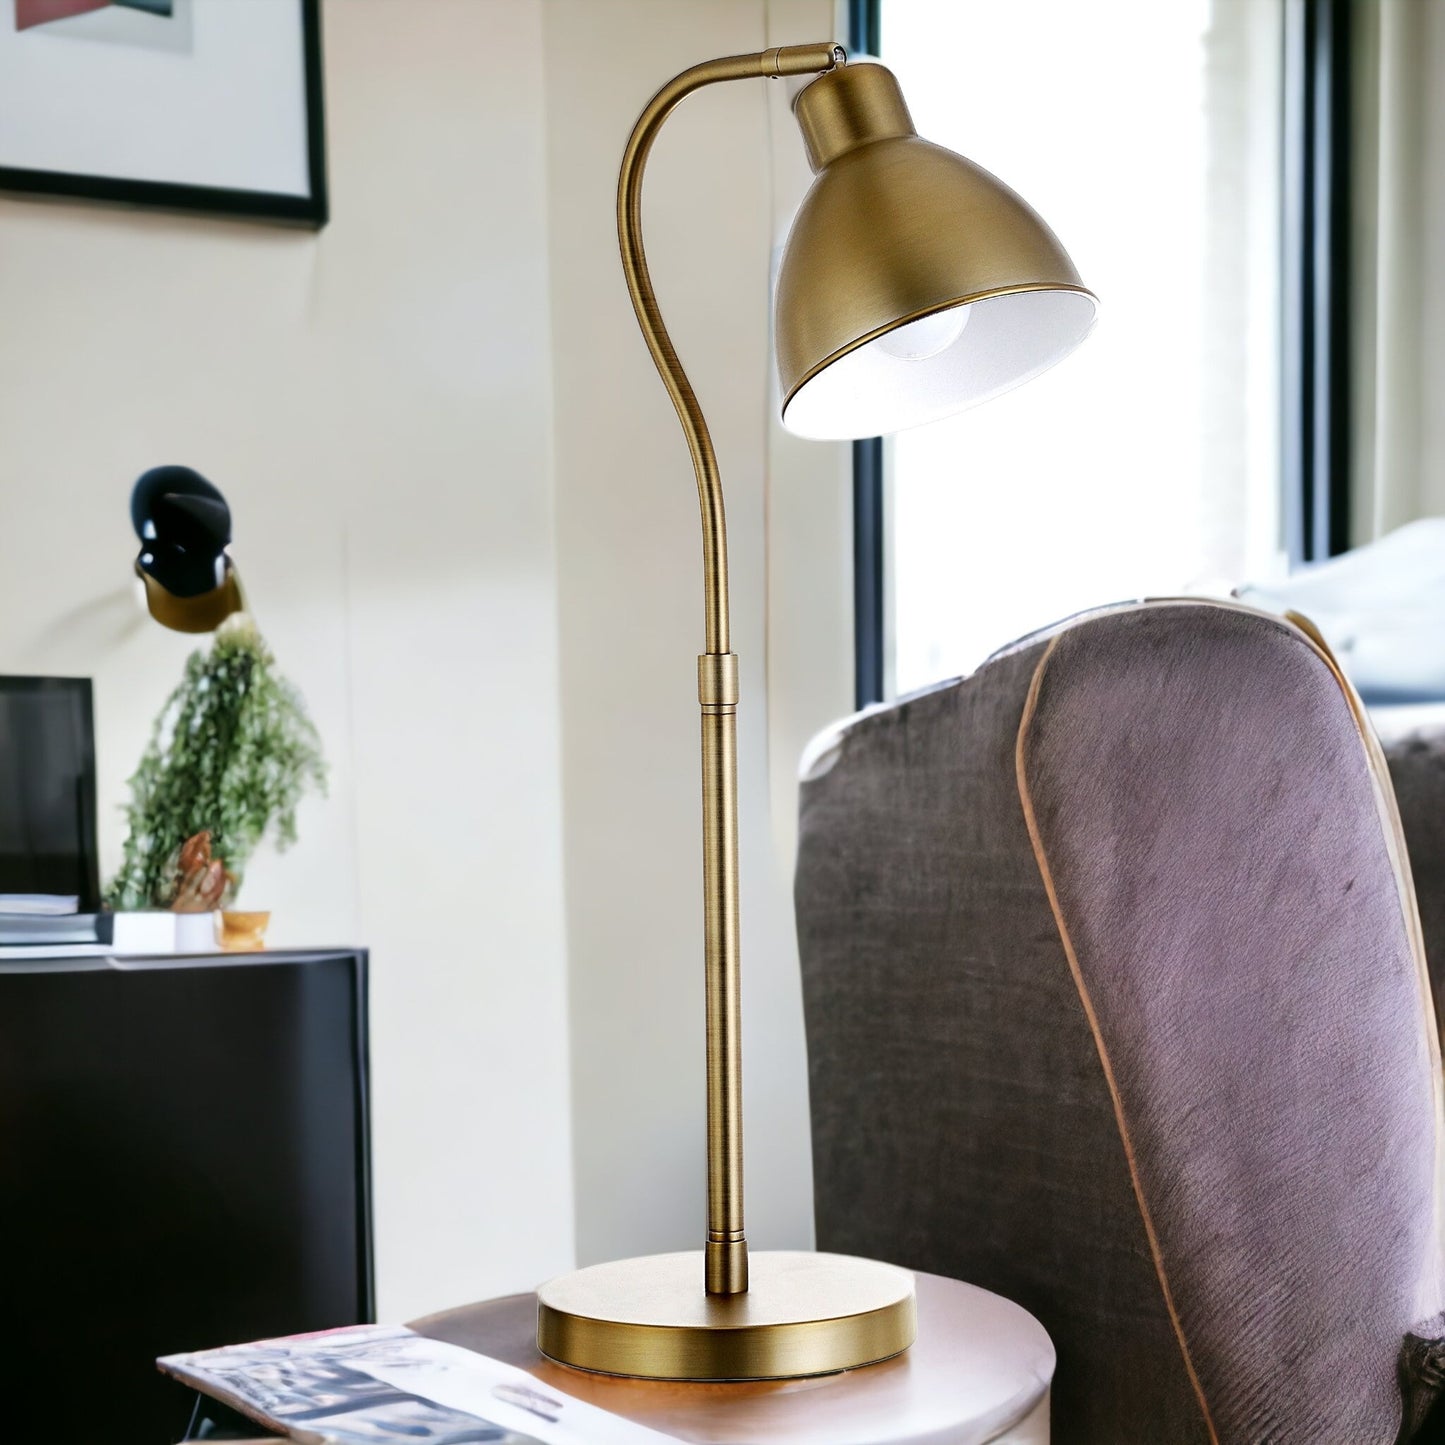 25" Brass Metal Arched Table Lamp With Brass Dome Shade